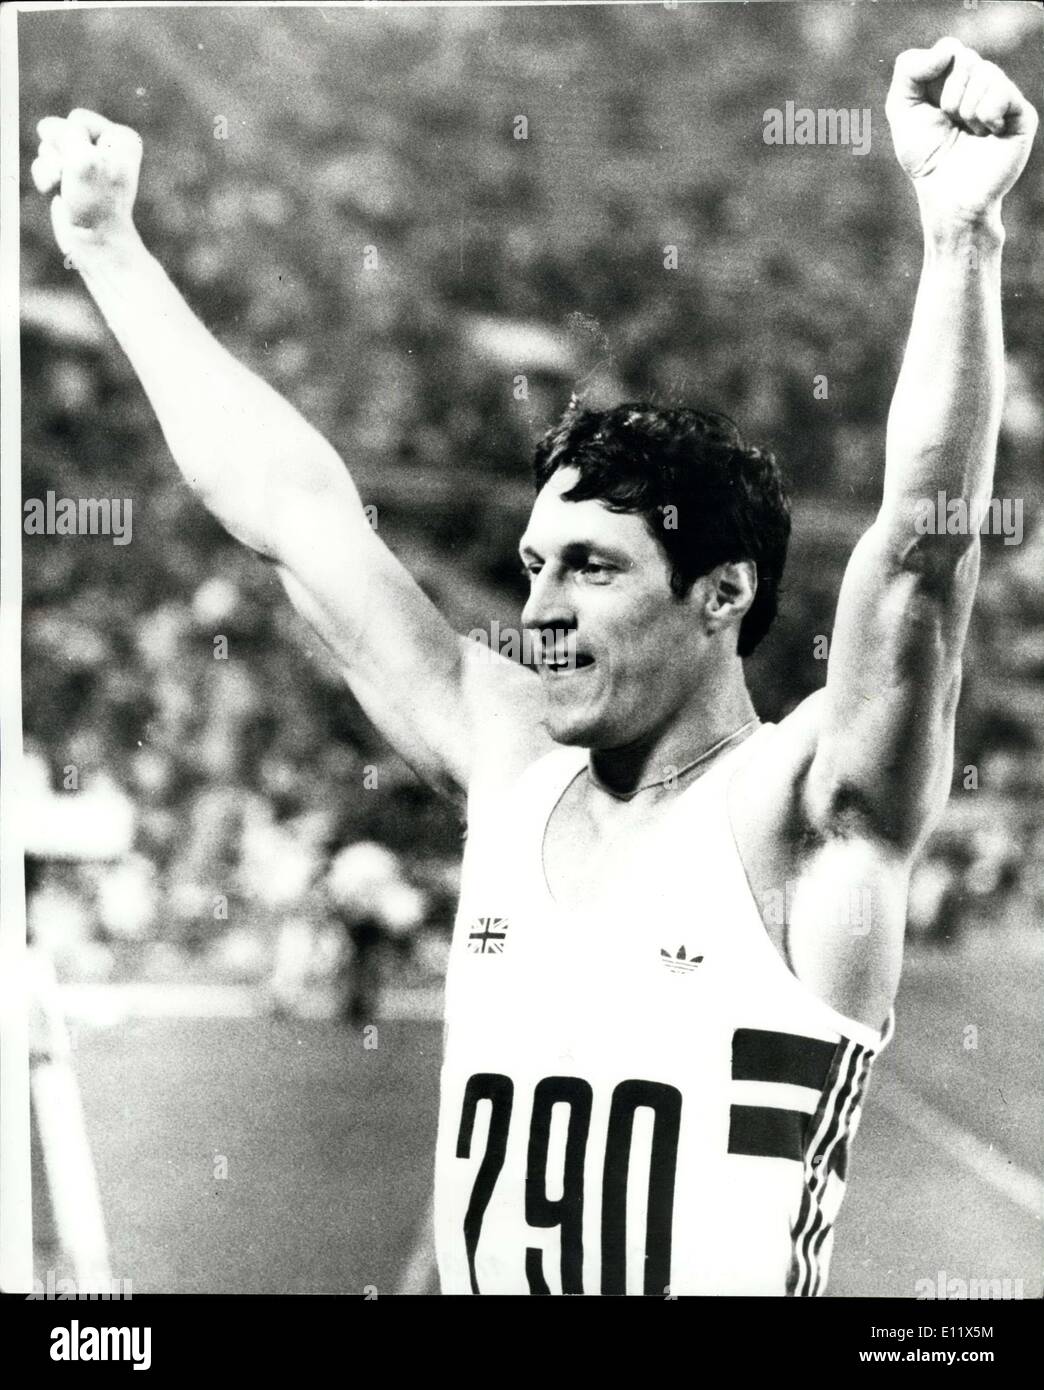 Jul. 06, 1980 - Moscow Olympics, Alan Wells wins 100M final: Photo shows Britain's Alan Well with his arms in the air after winning the final of the 100 meters in 10.25. Stock Photo